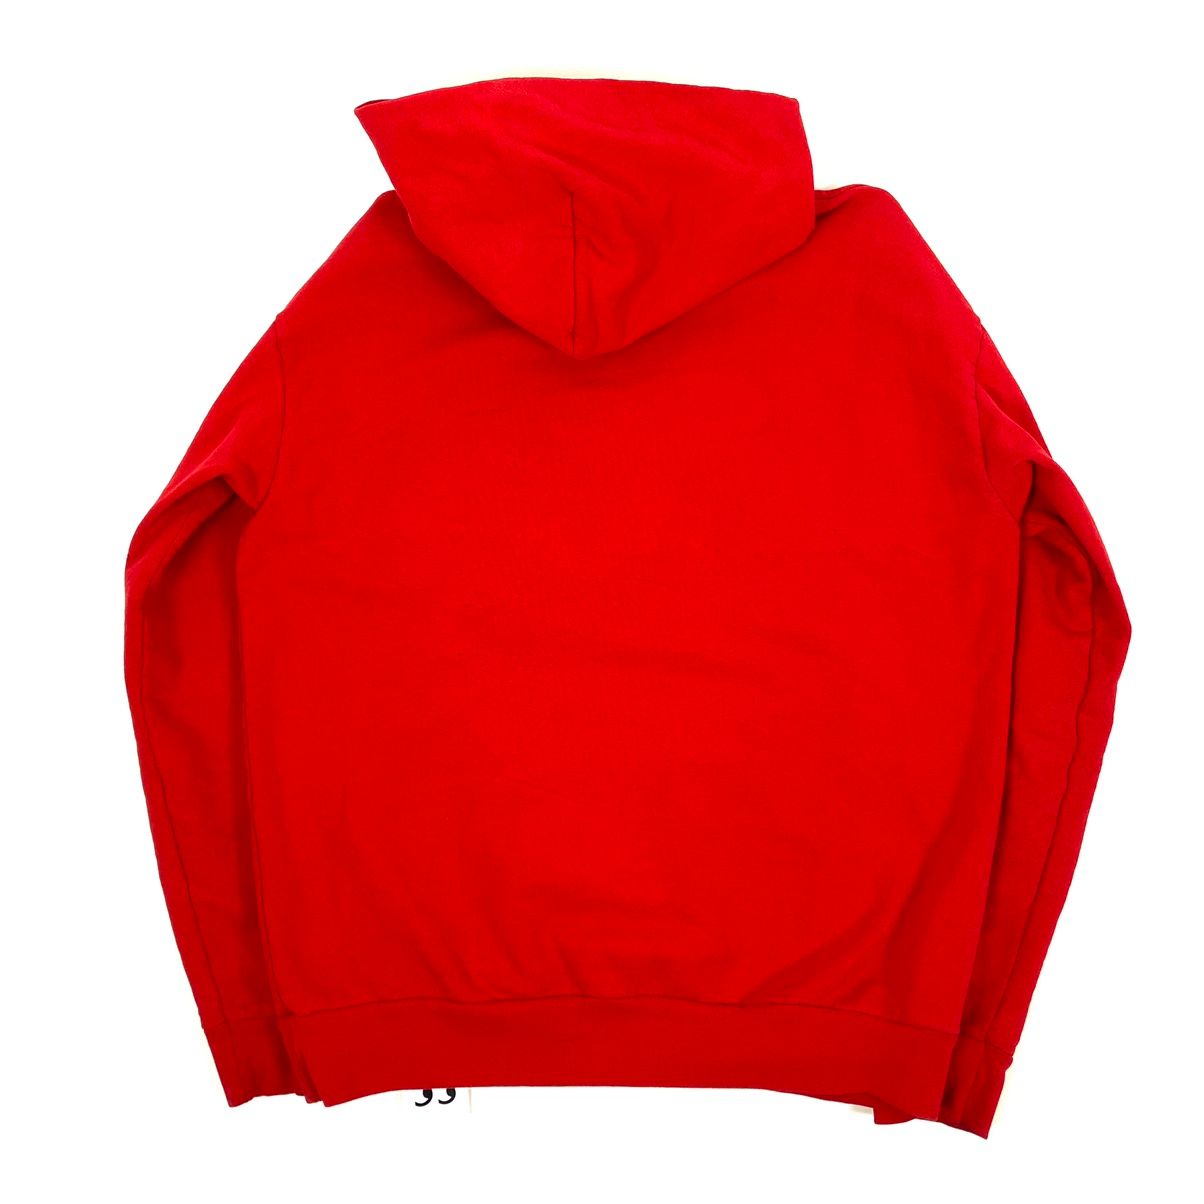 Young Thug Spider Worldwide Web Hoodie Pullover Young Thug Slatt Red Size US L / EU 52-54 / 3 - 6 Preview